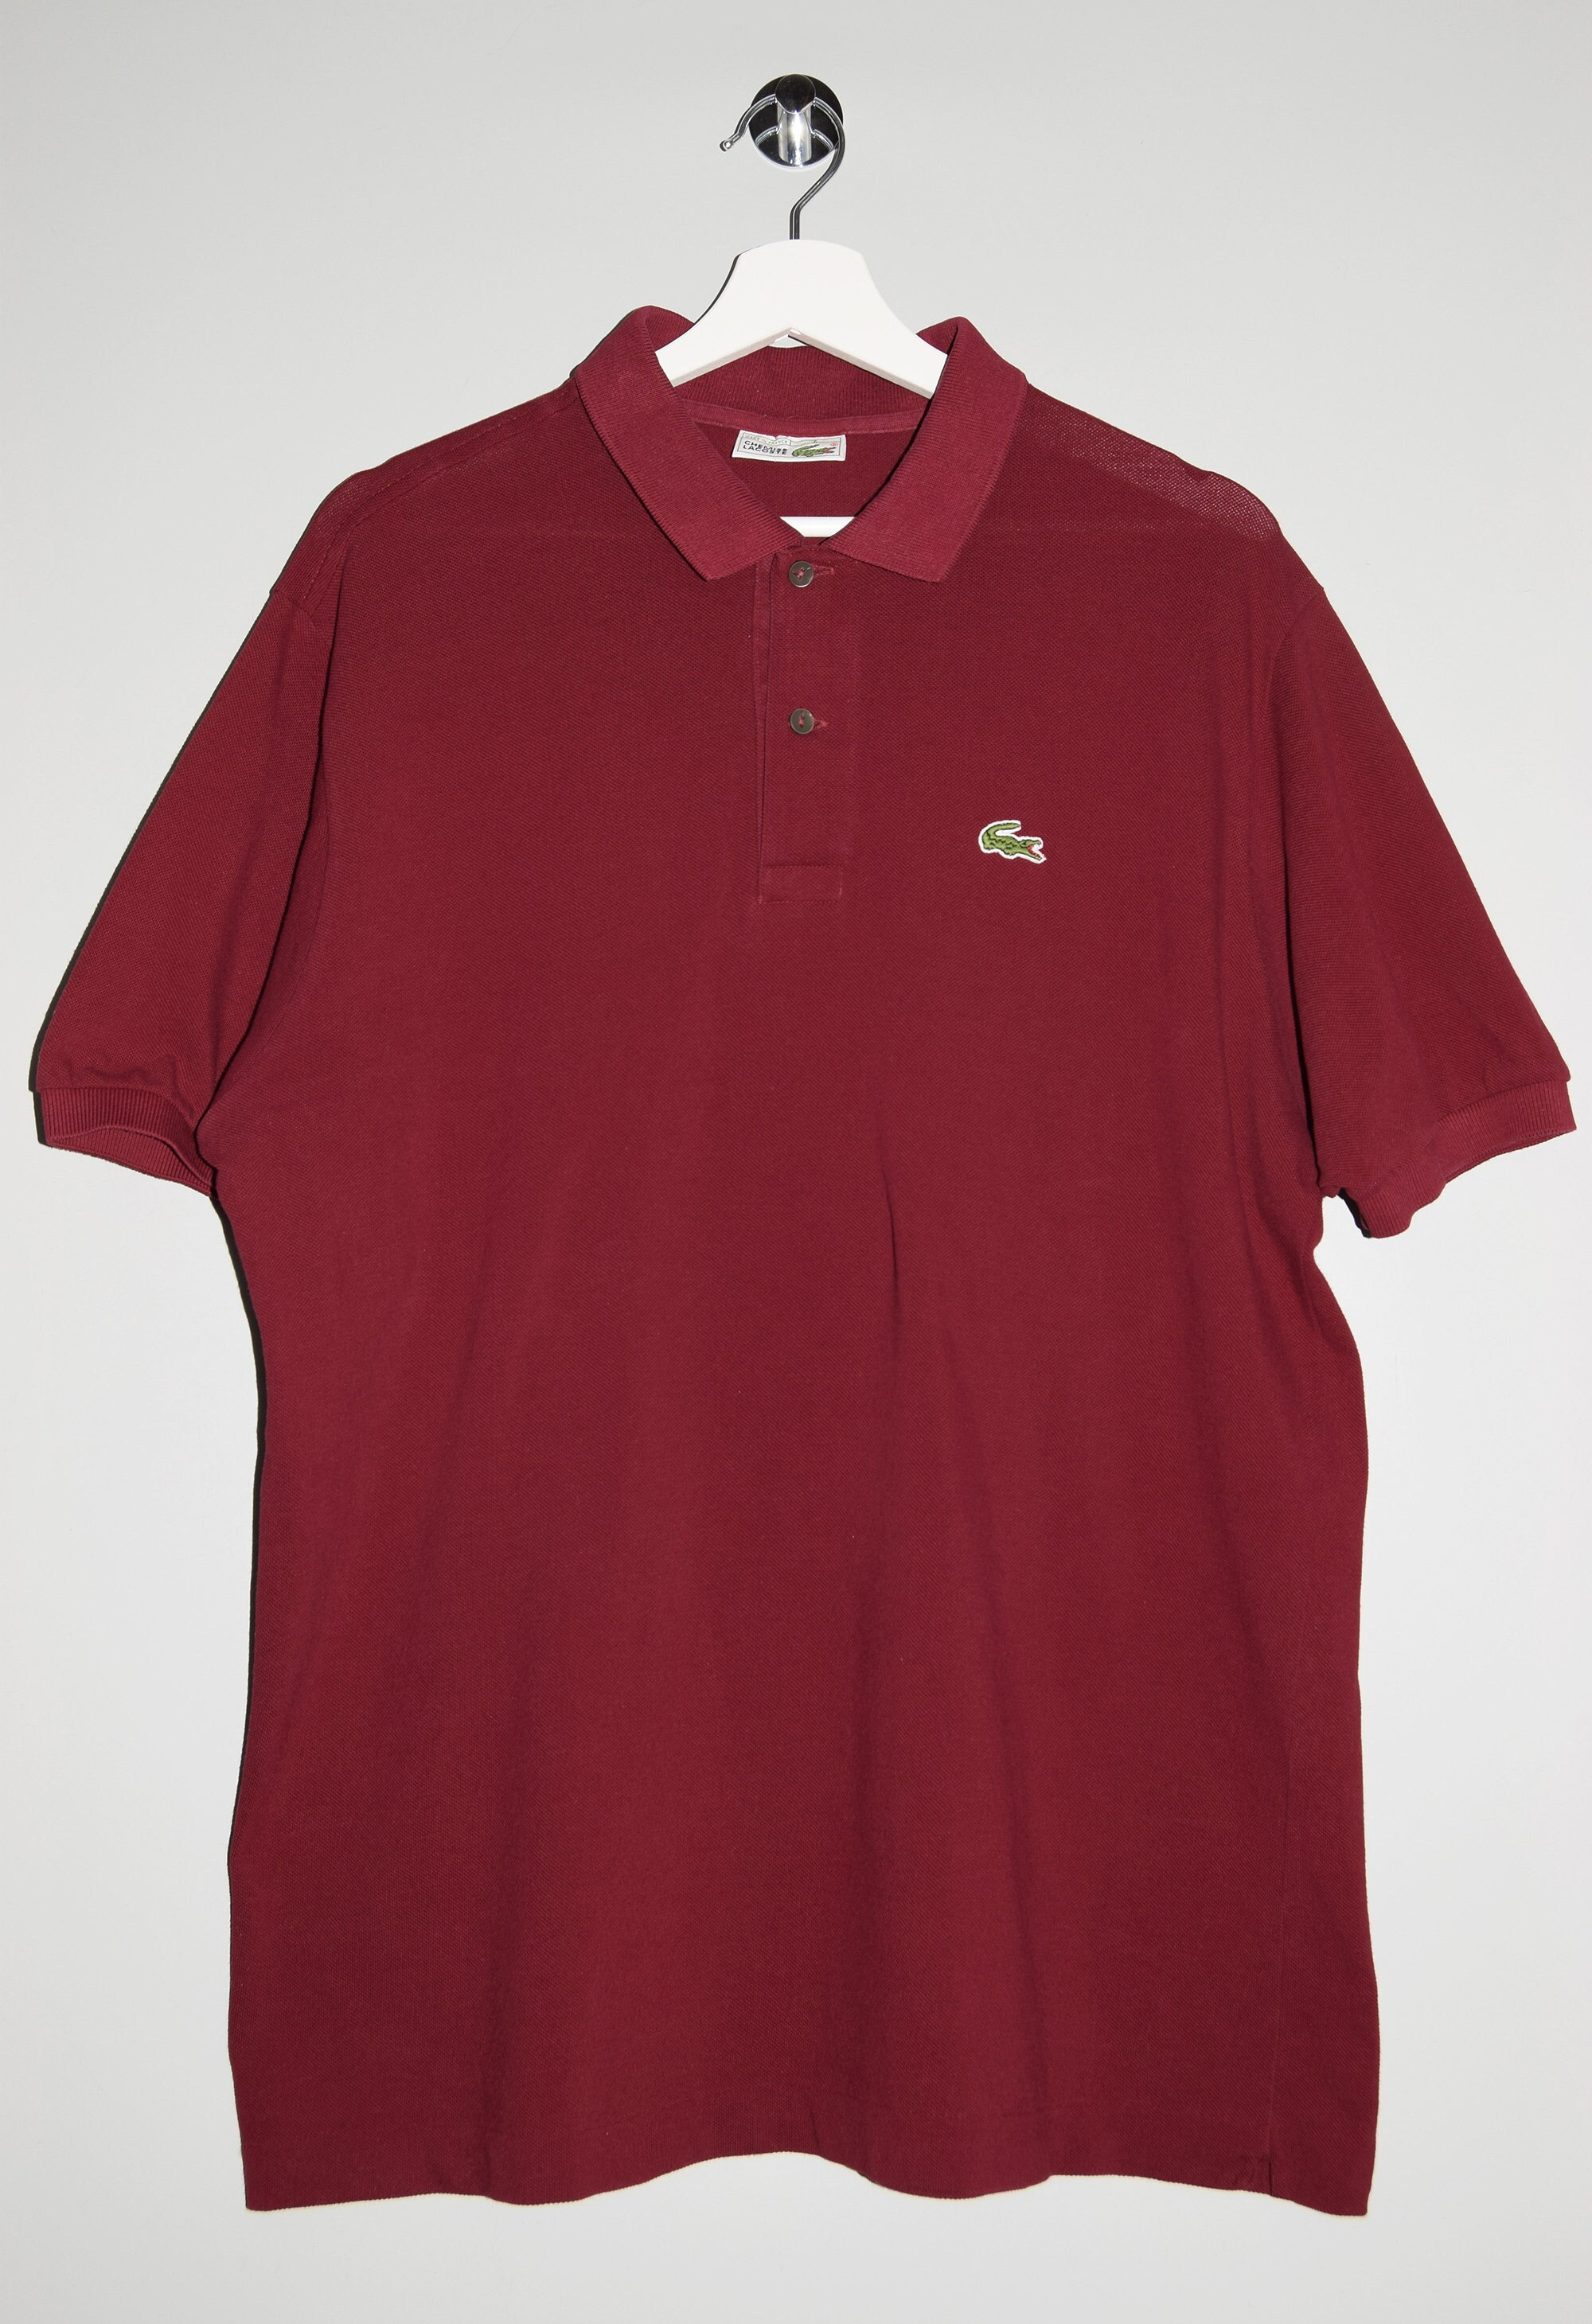 Vintage Lacoste Chemise Made in France Polo Shirt - Etsy